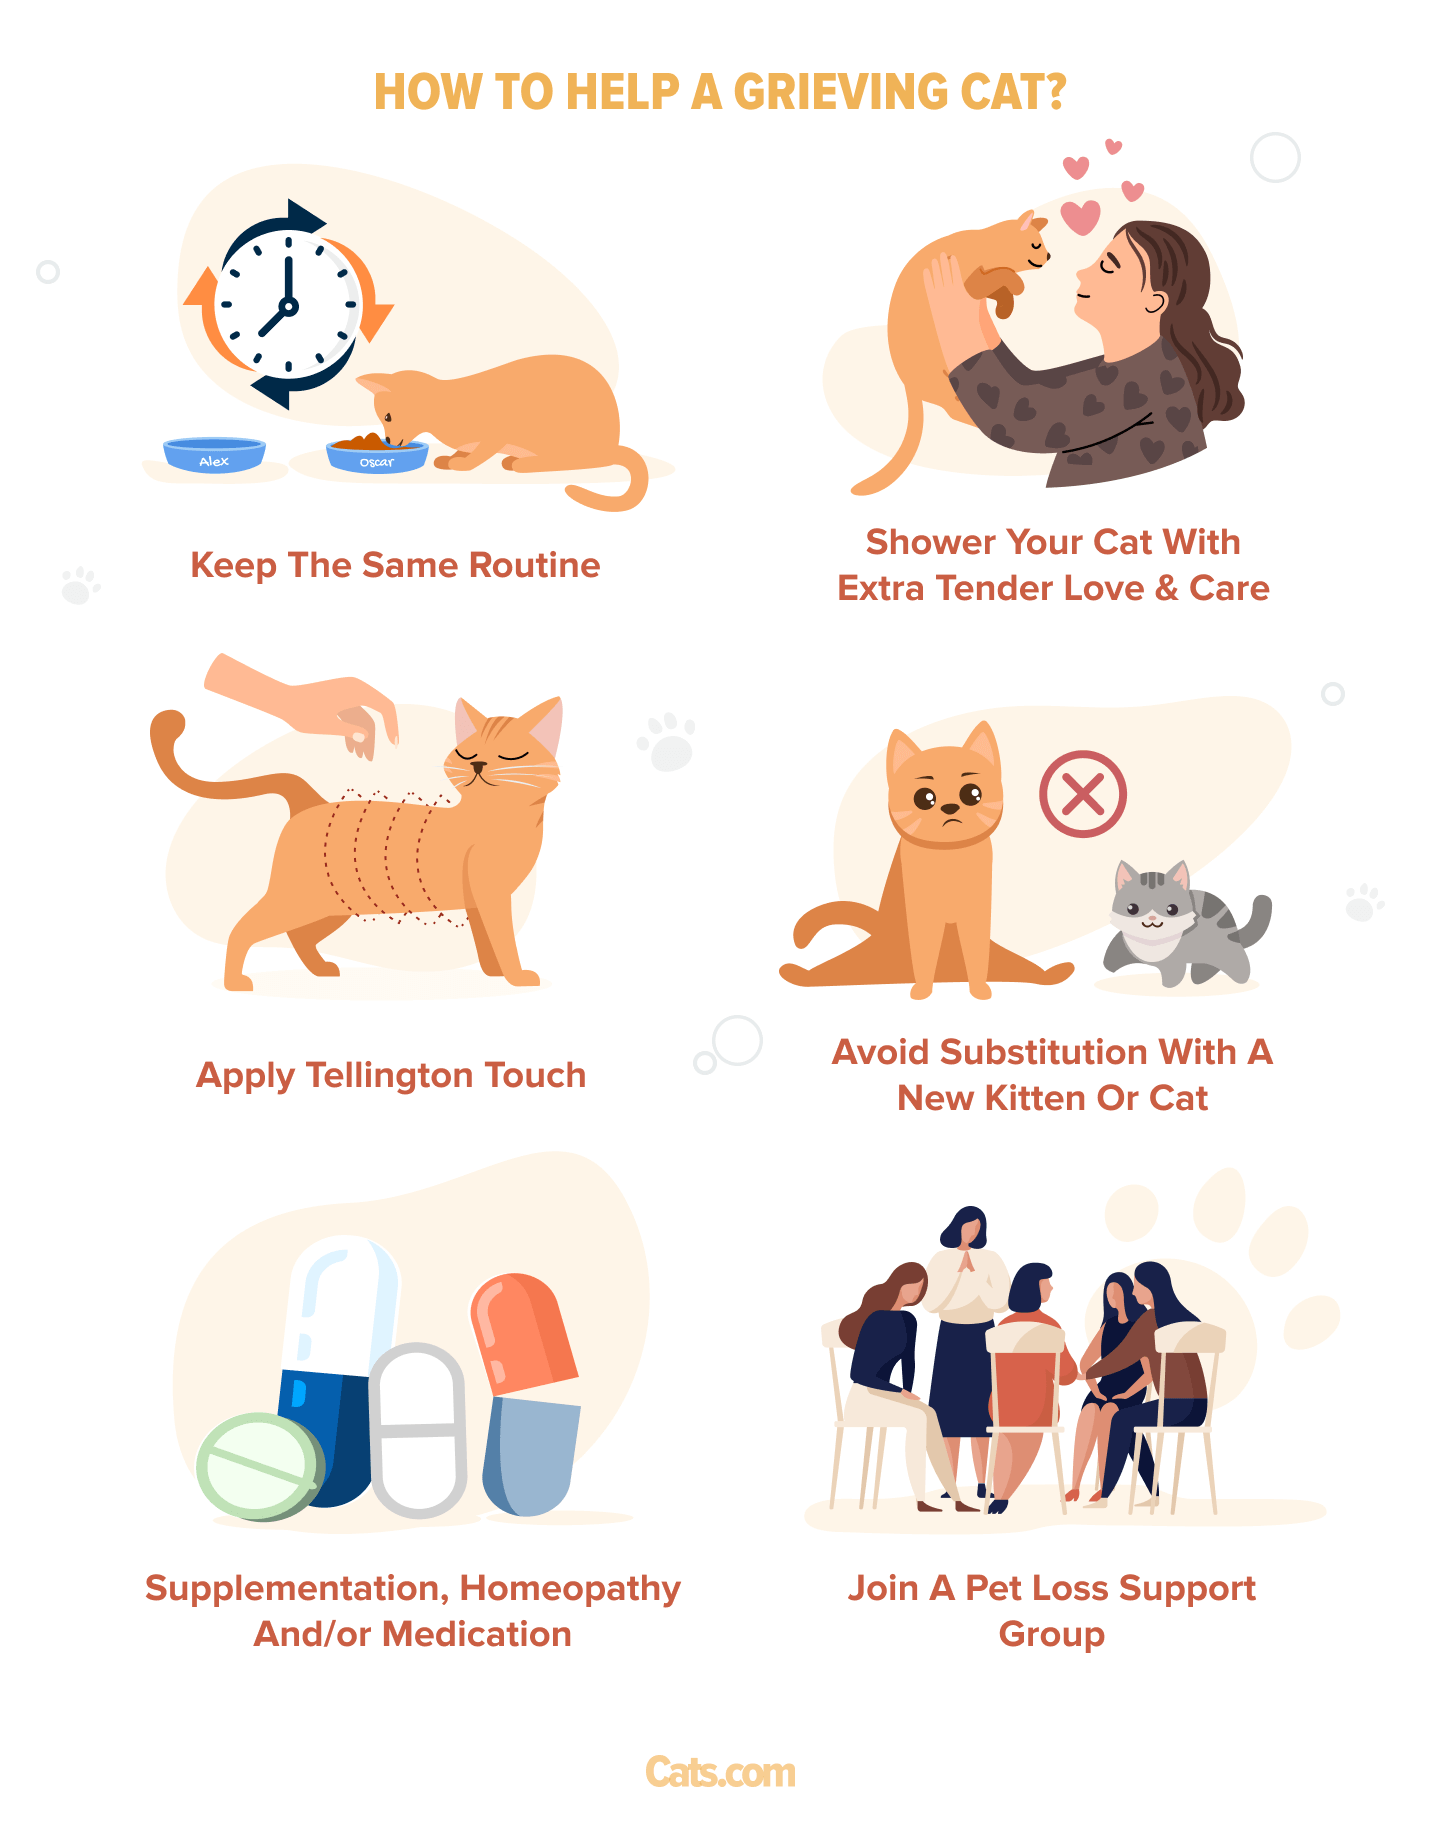 Image addressing ways to help cats deal with grief.